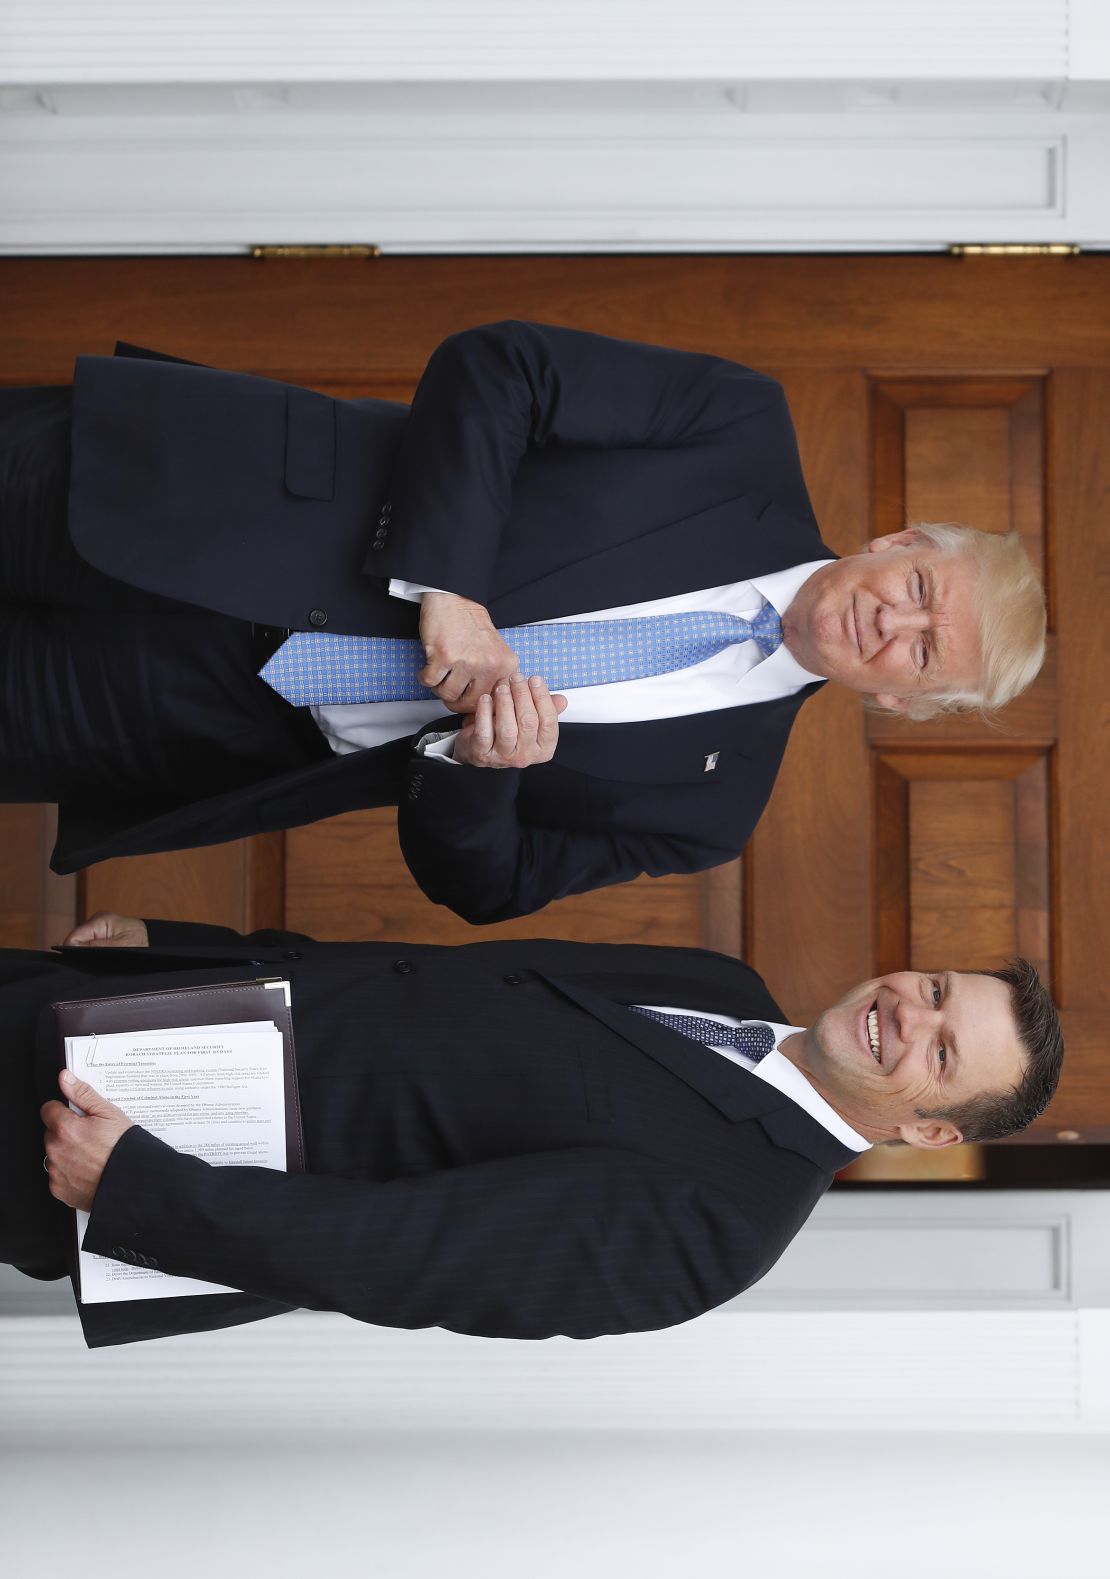 The document Kansas secretary of state Kris Kobach is holding during a photo-op with President-elect Donald Trump on Sunday in Bedminster, NJ. (AP Photo/Carolyn Kaster)